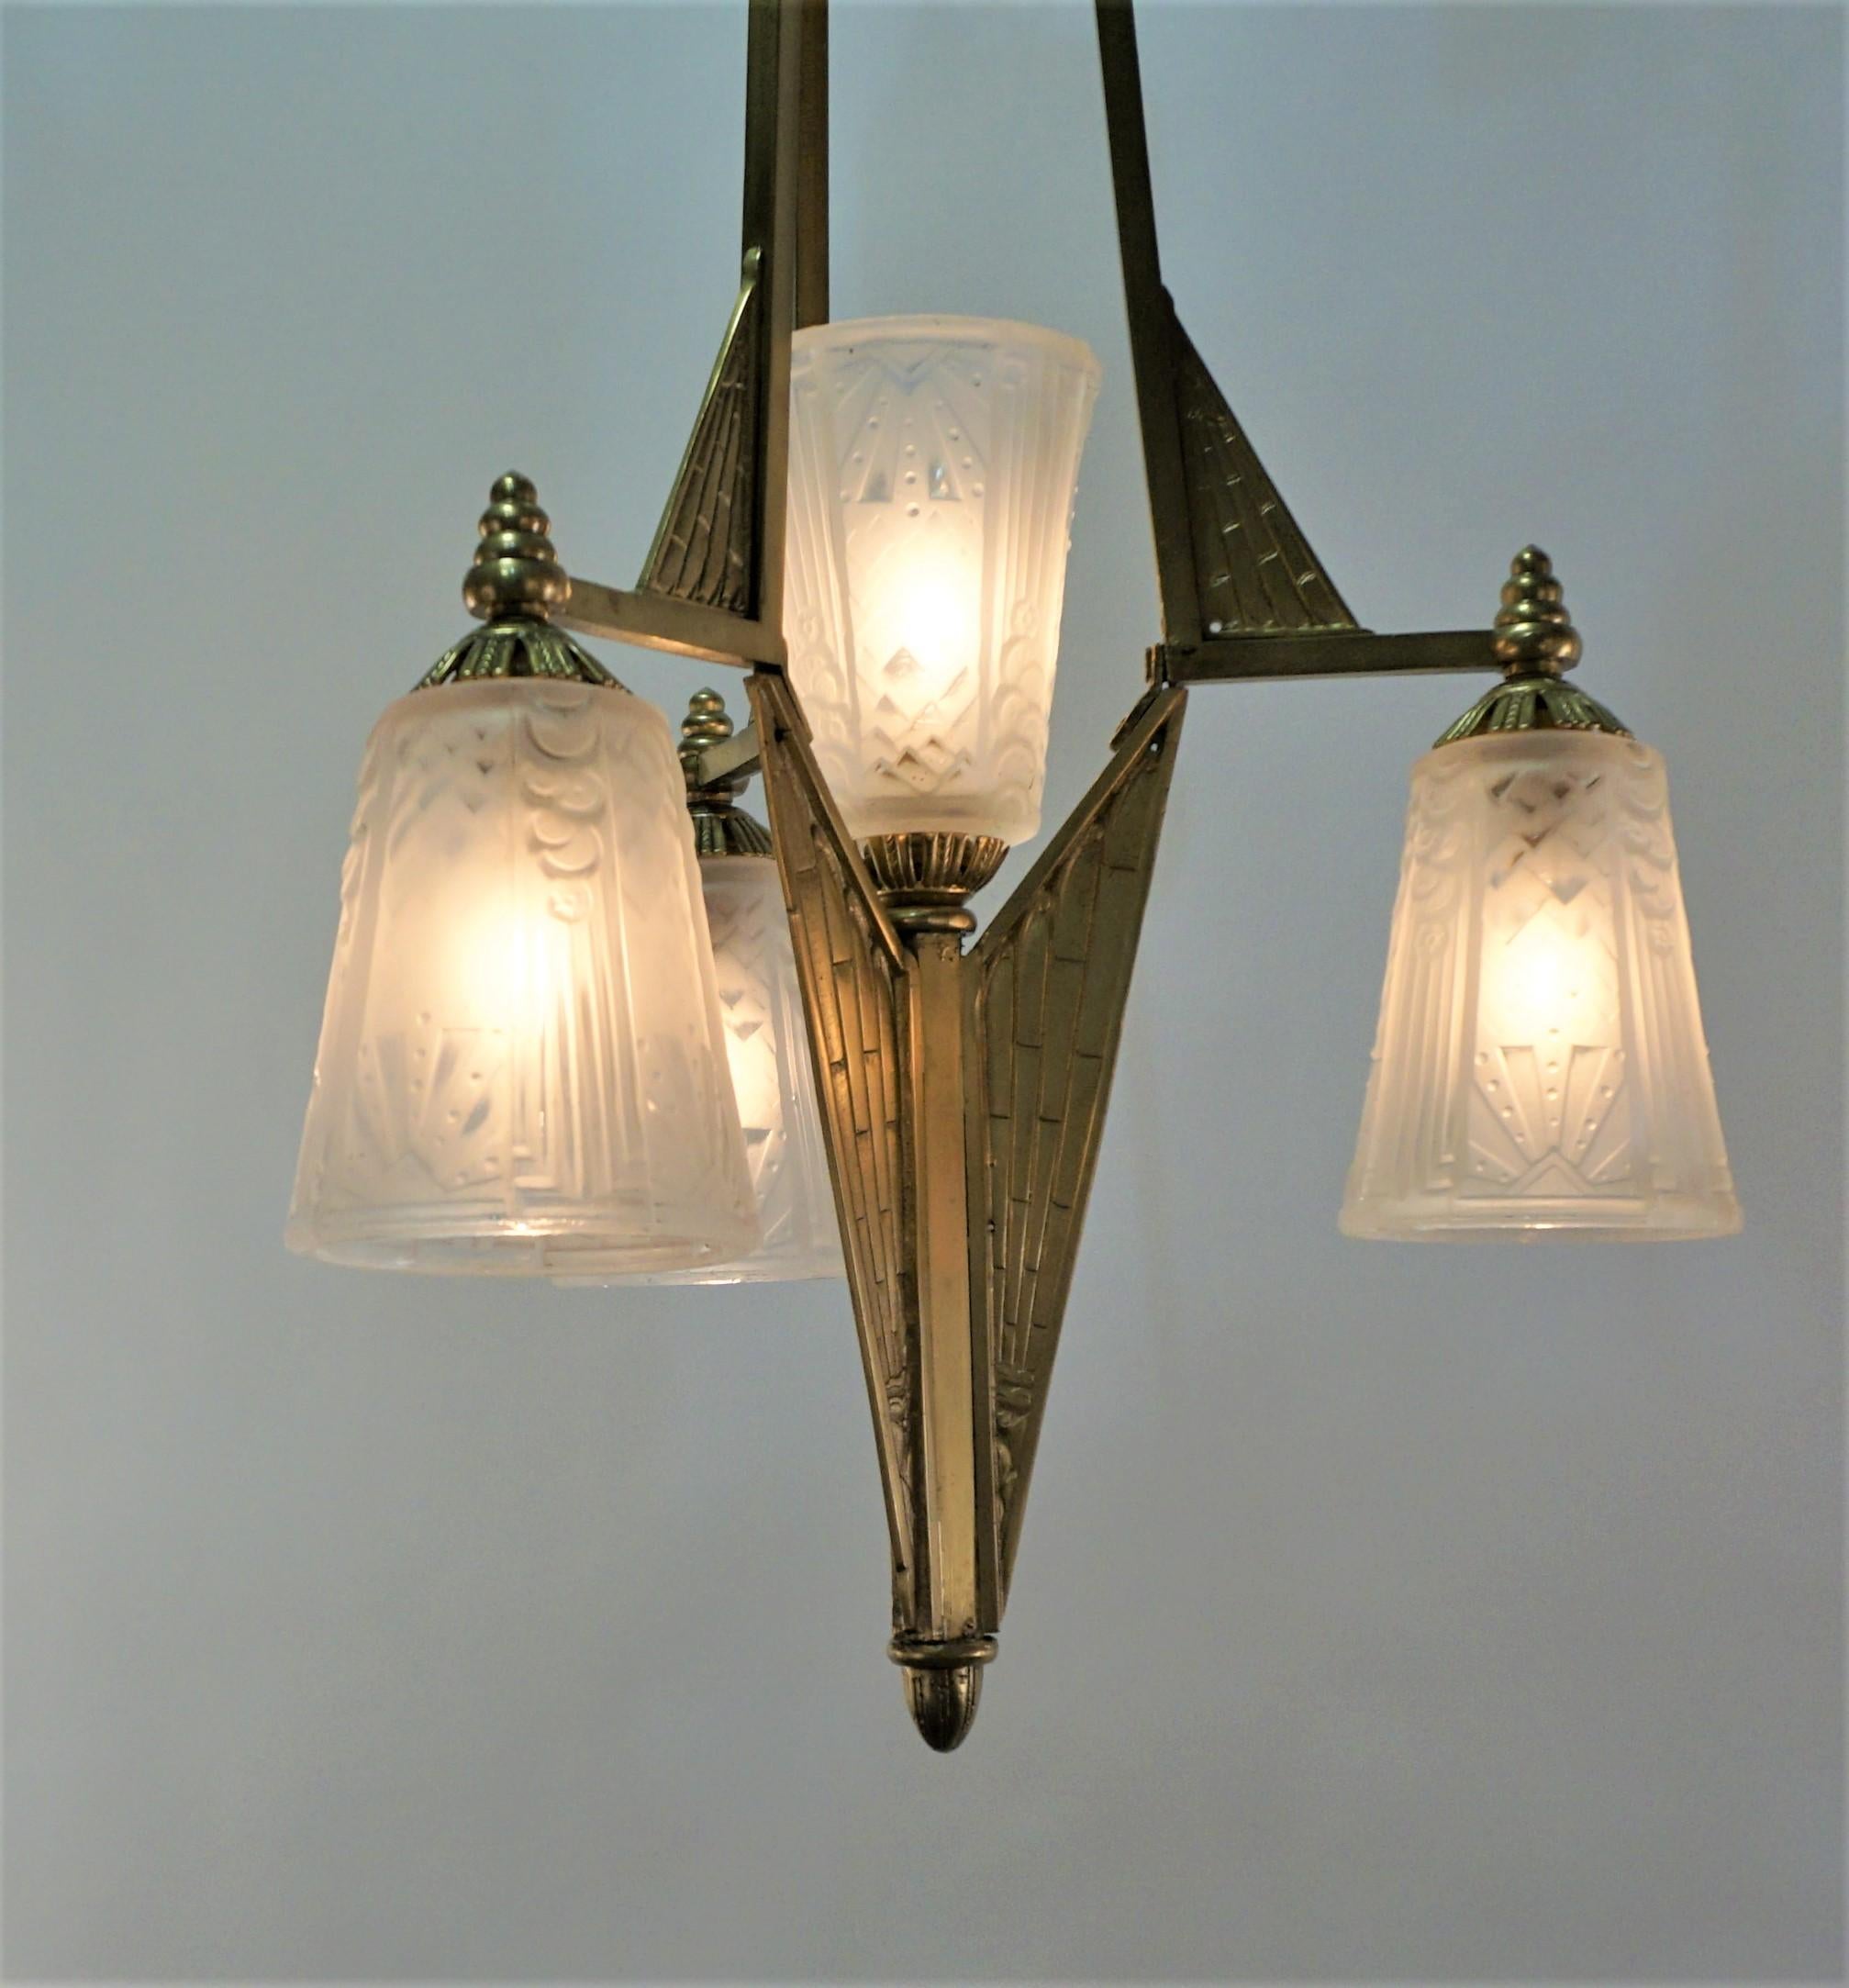 French 1920's bronze art deco chandelier with clear frost geometric design glass shades.
Four lights 75Watt max each.